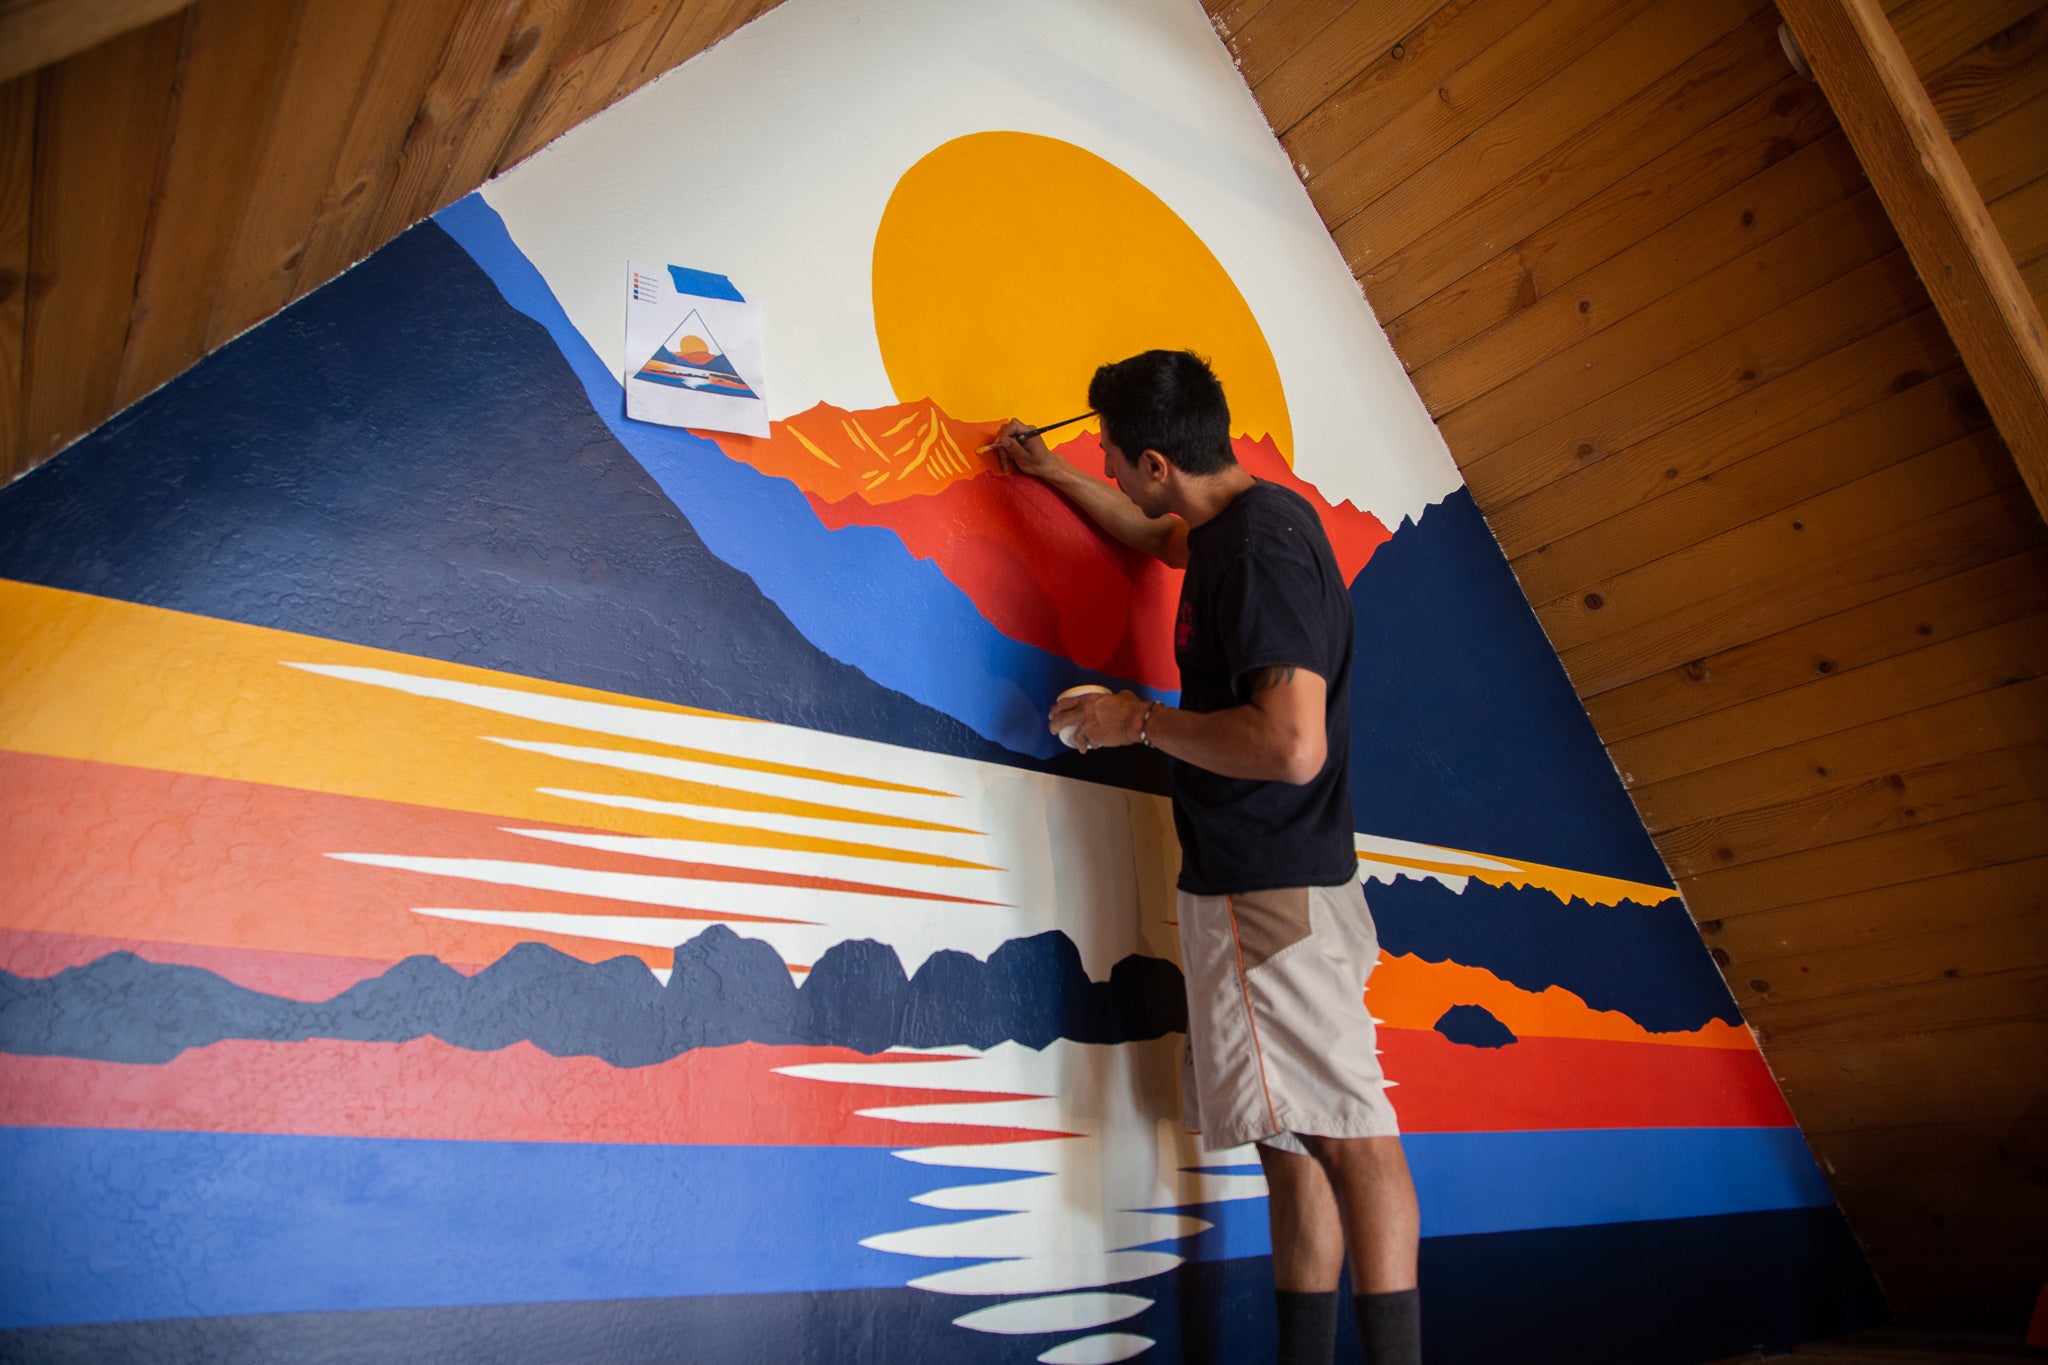 Artist Nate Riefke (@saltytimbers) paints a Convict Lake mural inside the Ridge Collective showroom